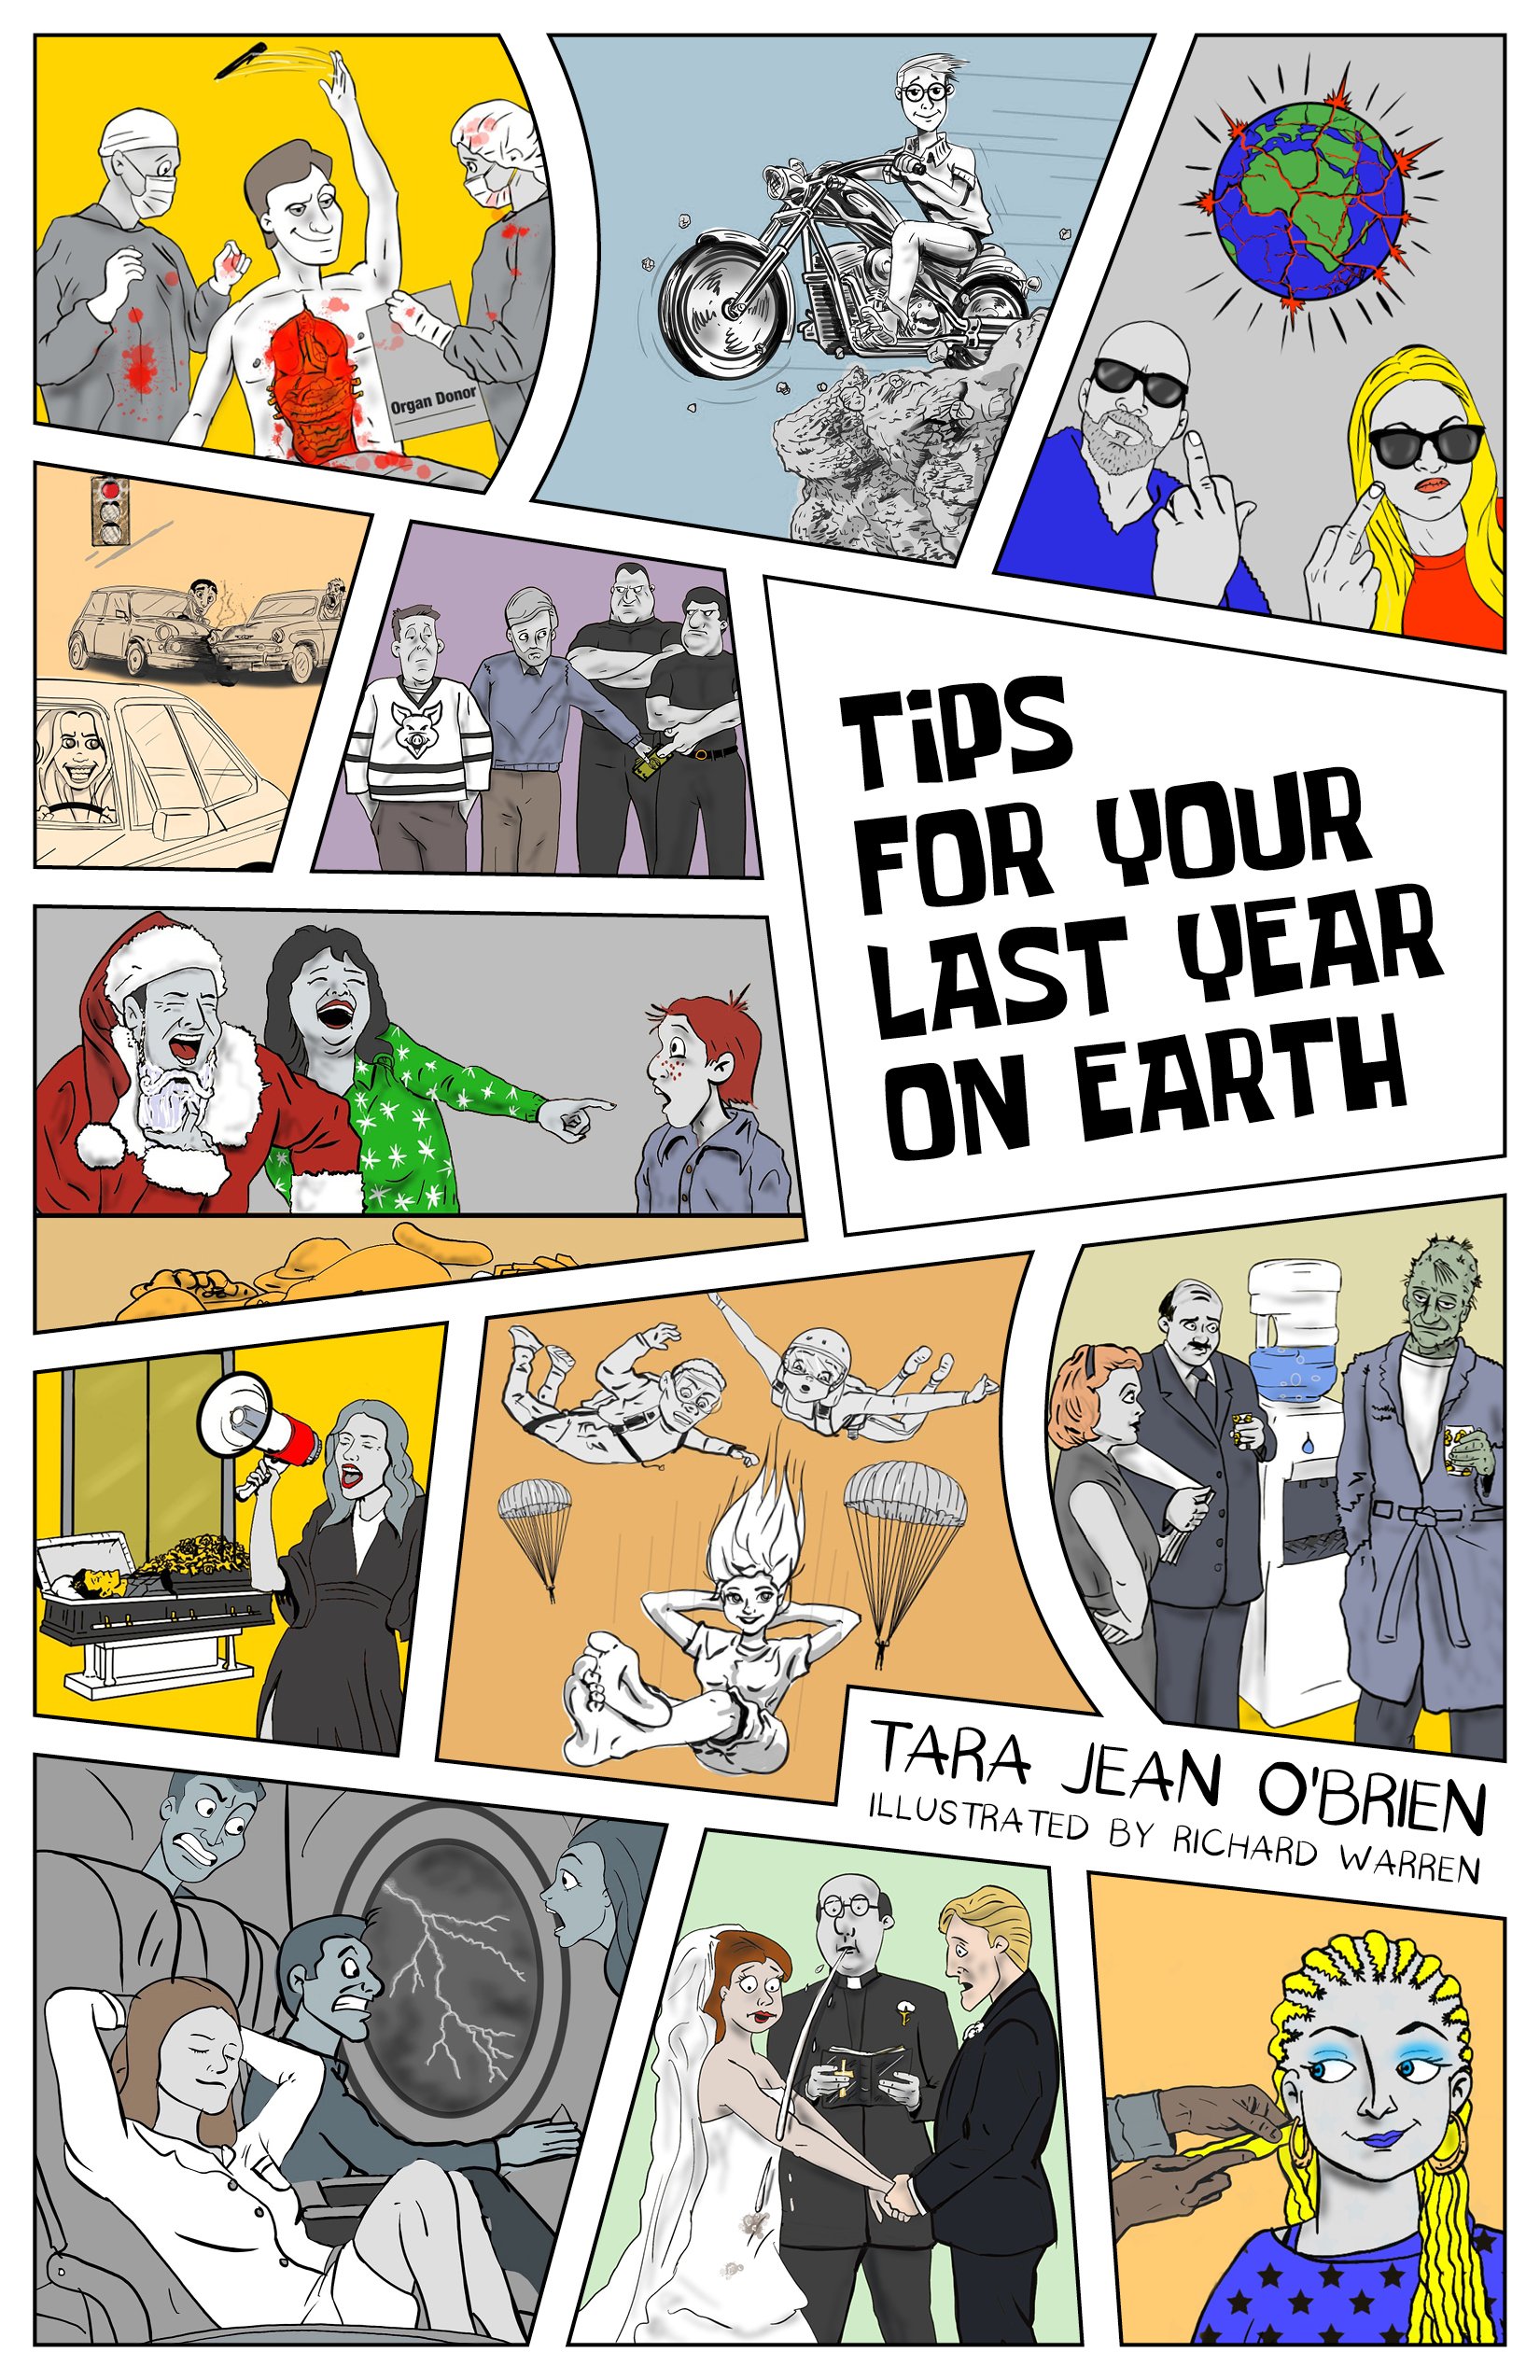 Tips for your last year on earth - Ebook cover.jpg